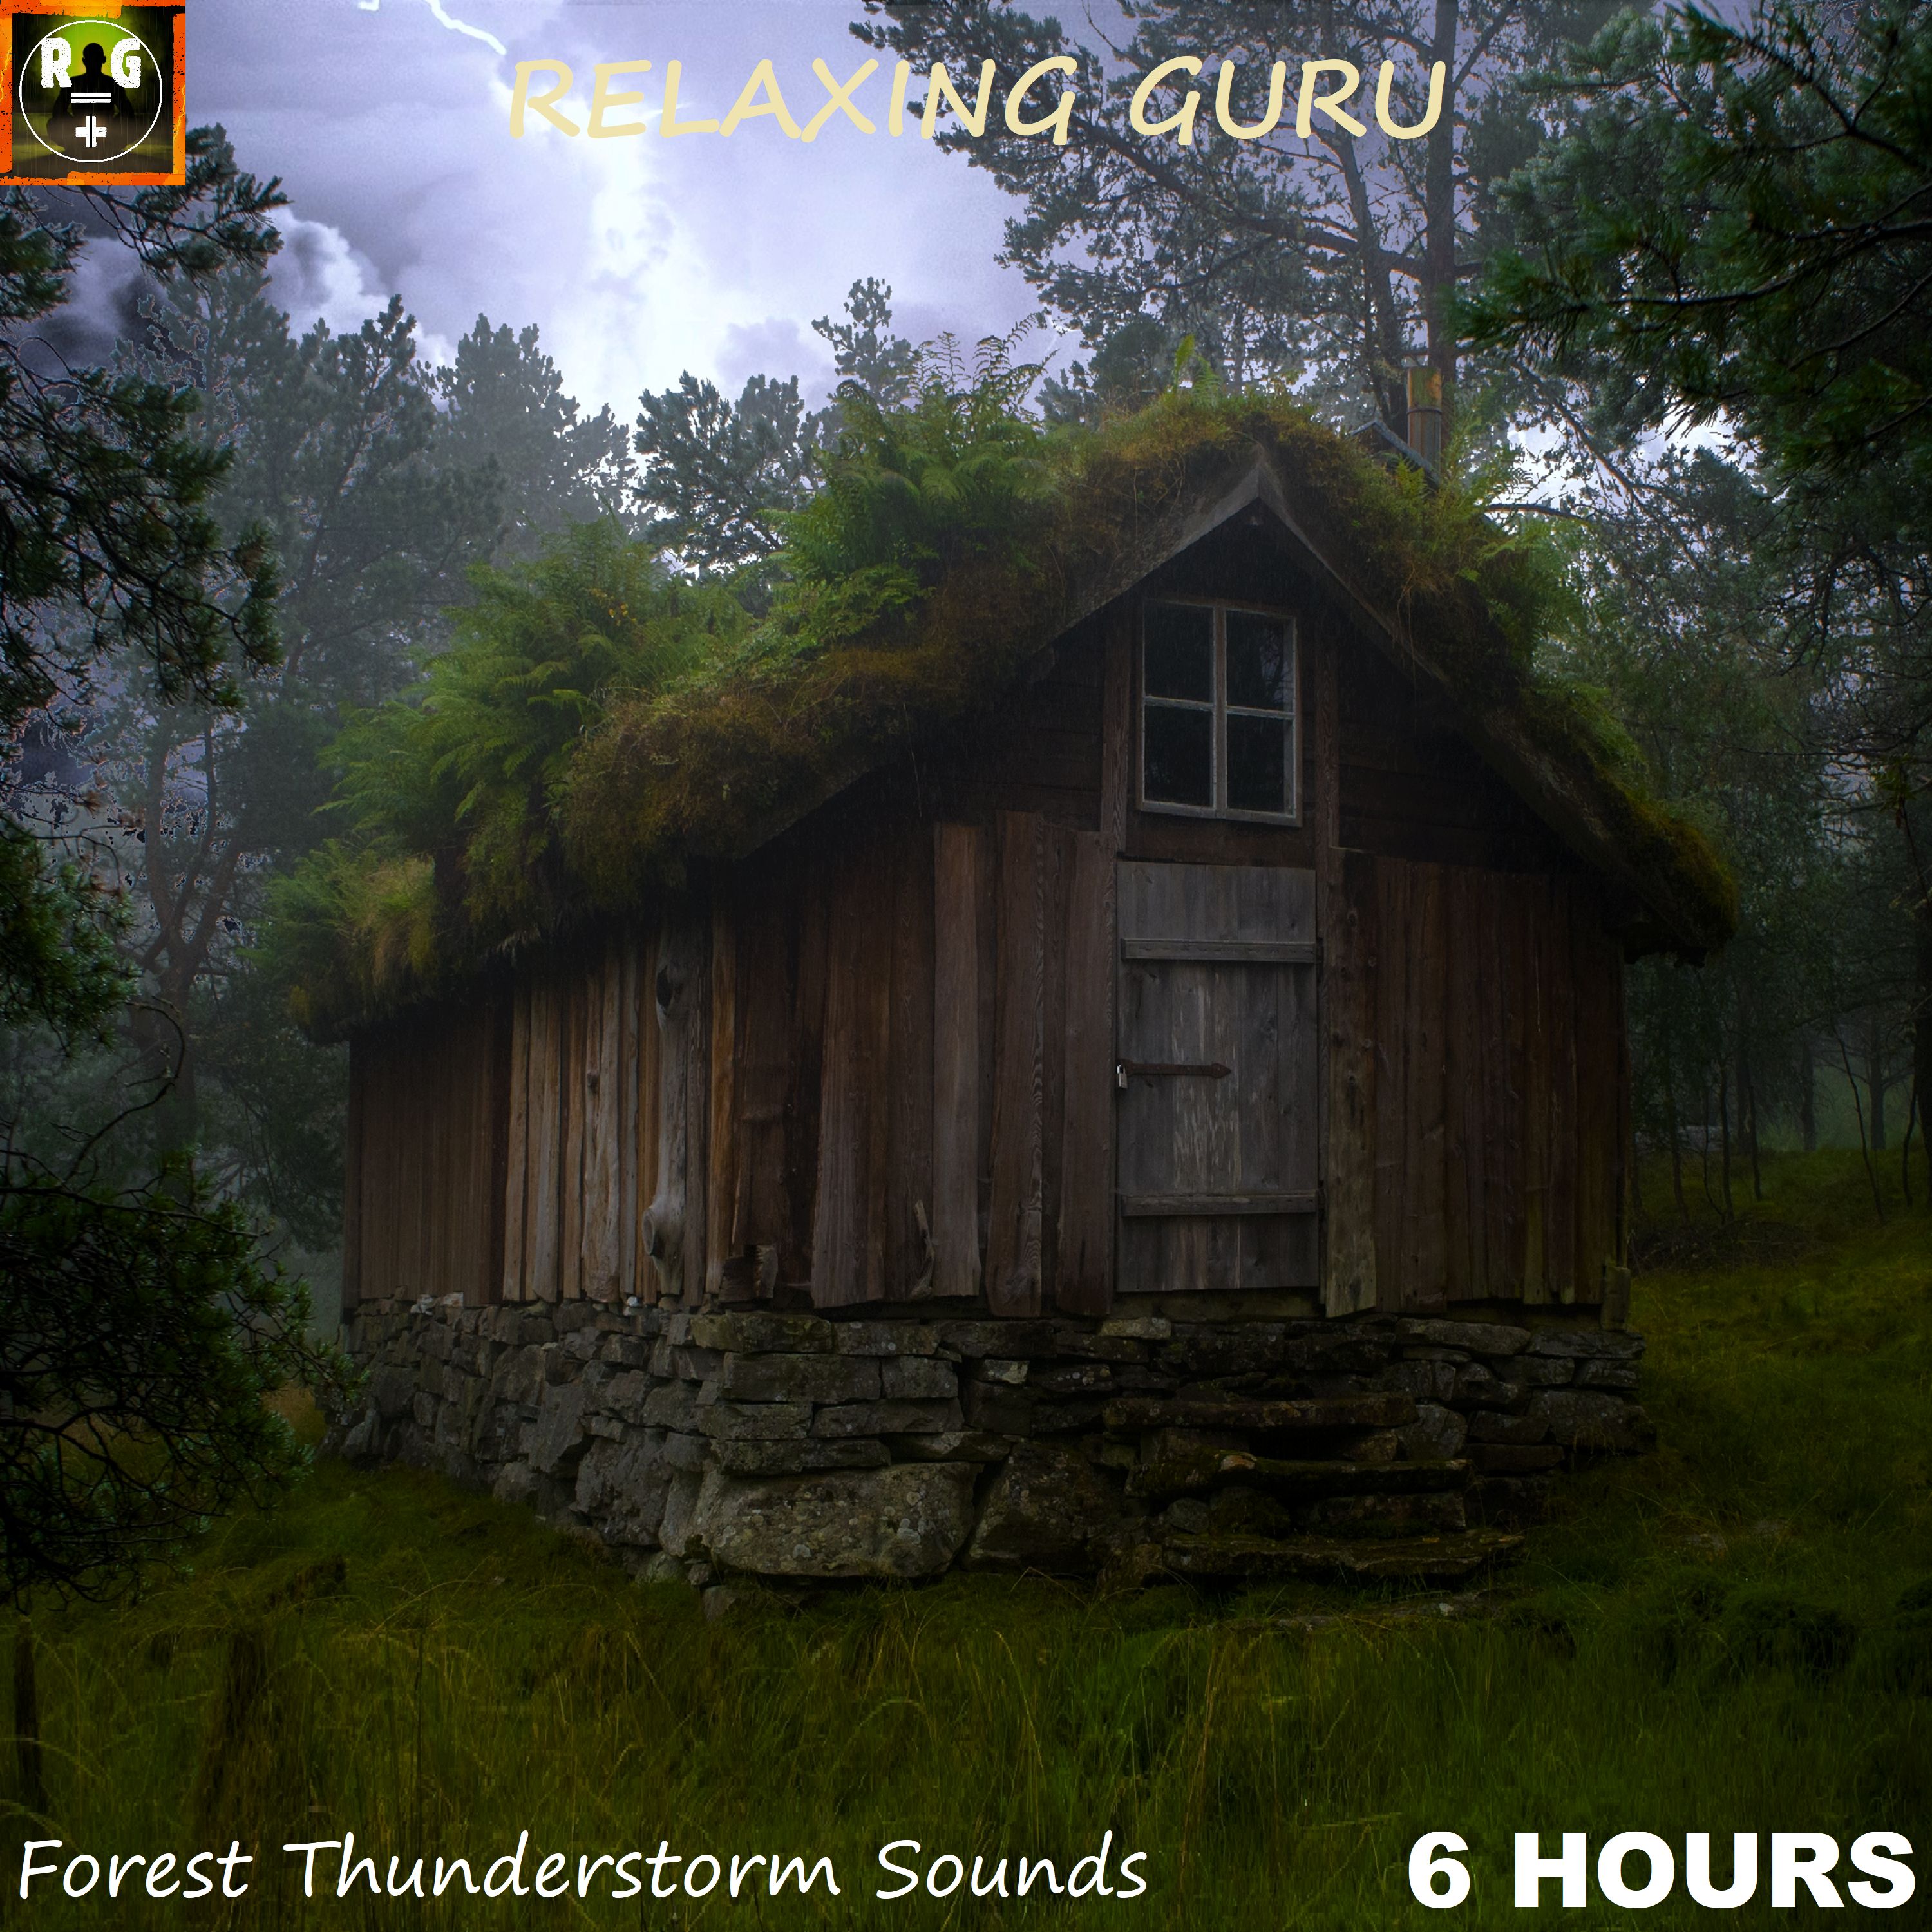 Descarca Relaxing Rain & Thunder on a Wooden Hut deep in the Forest - Thunderstorm Sounds for Sleep (6 HOURS)